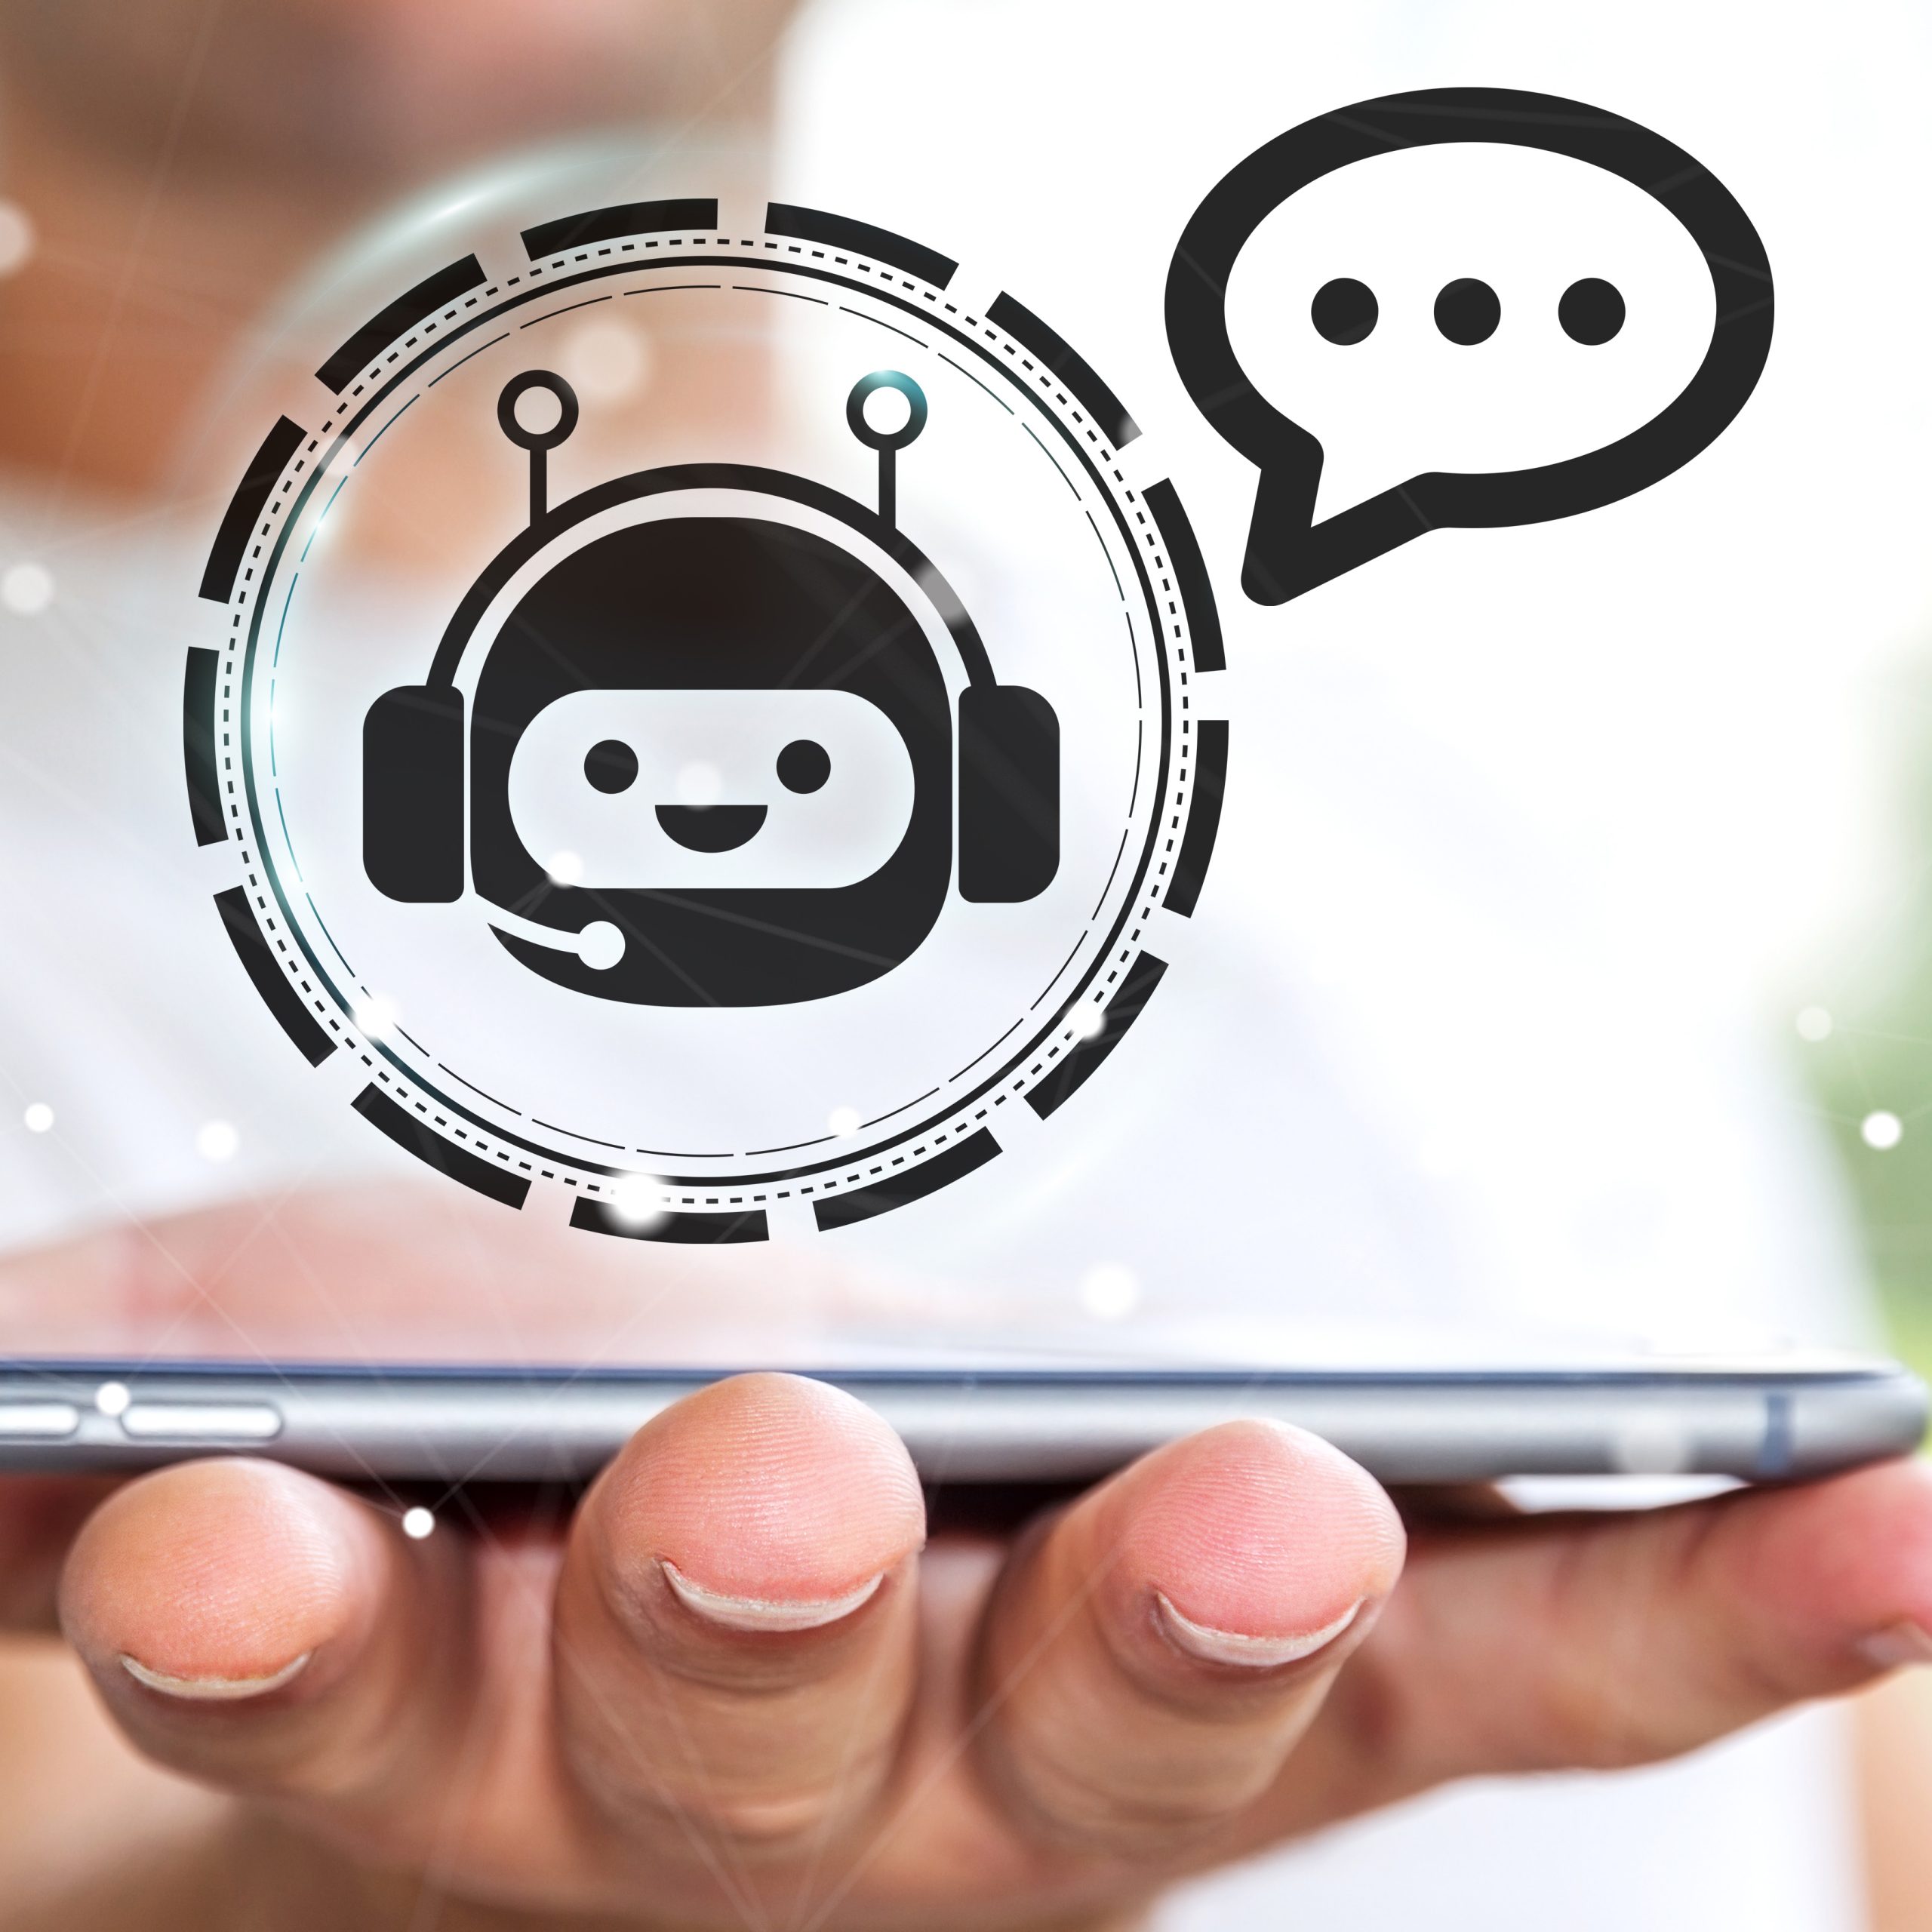 Chatbot shutterstock 777587719 SQUARE scaled